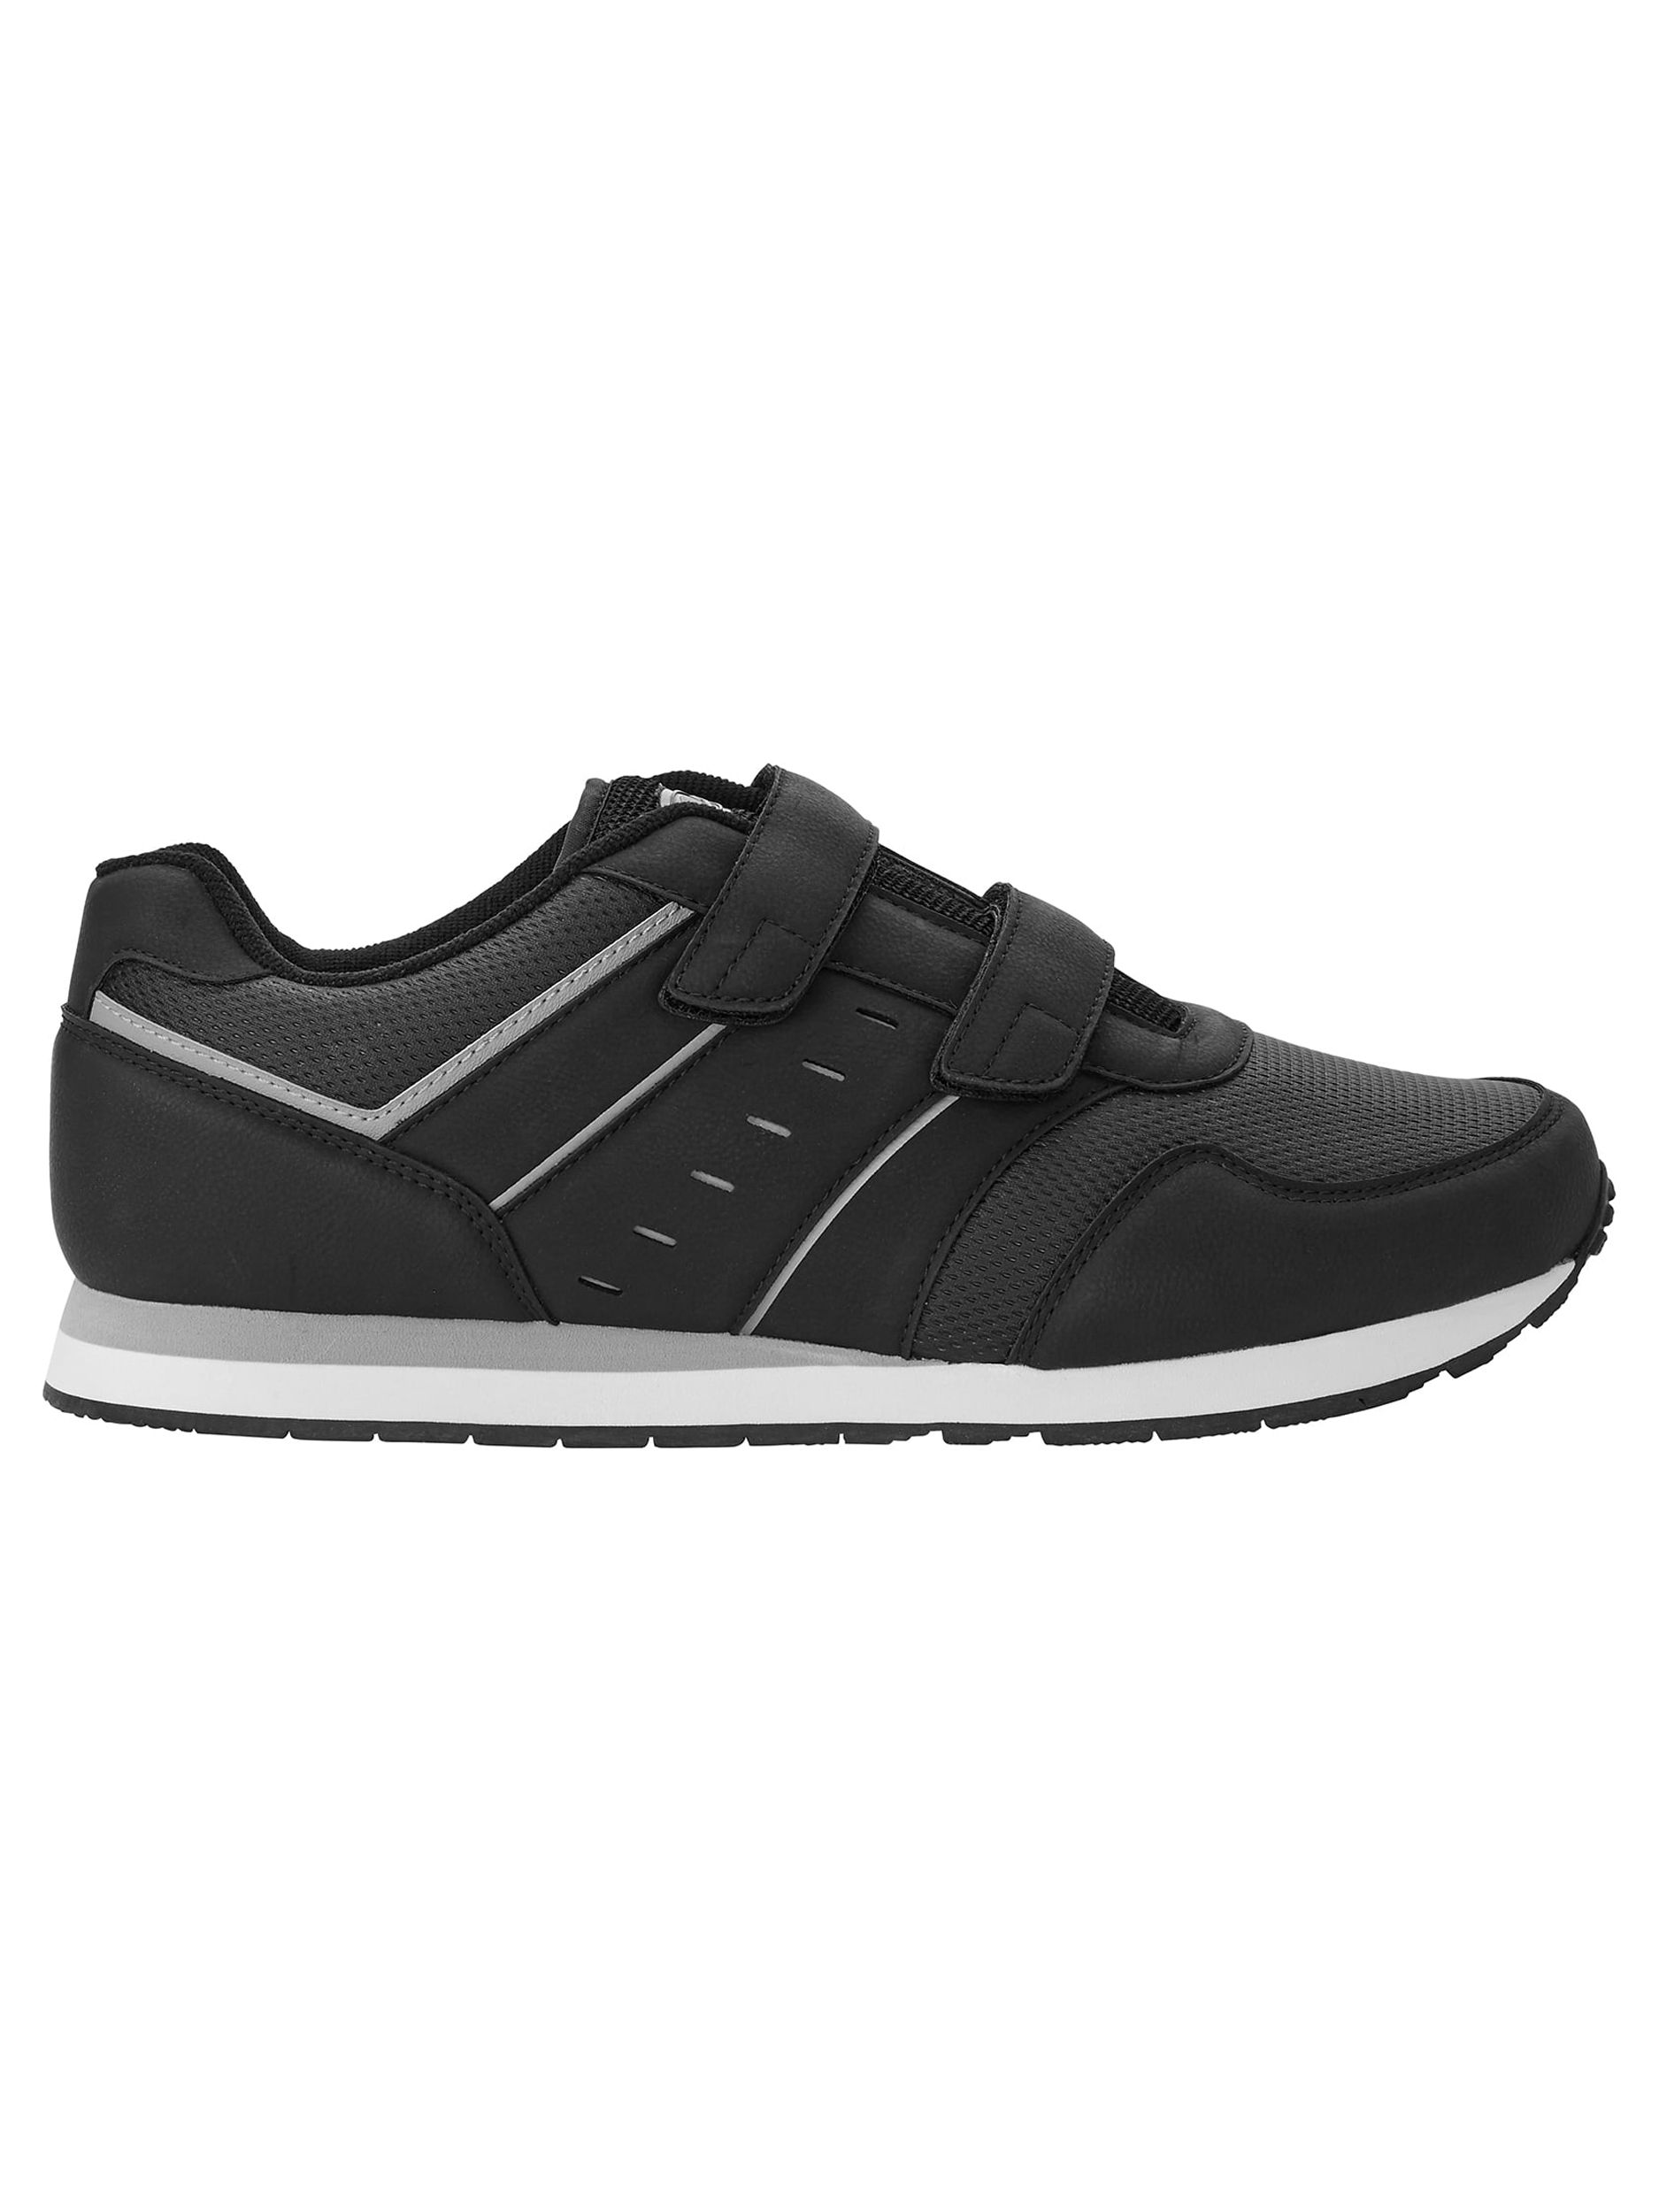 Athletic Works Men's Silver Series 3 Wide Width Athletic Shoe - image 5 of 6